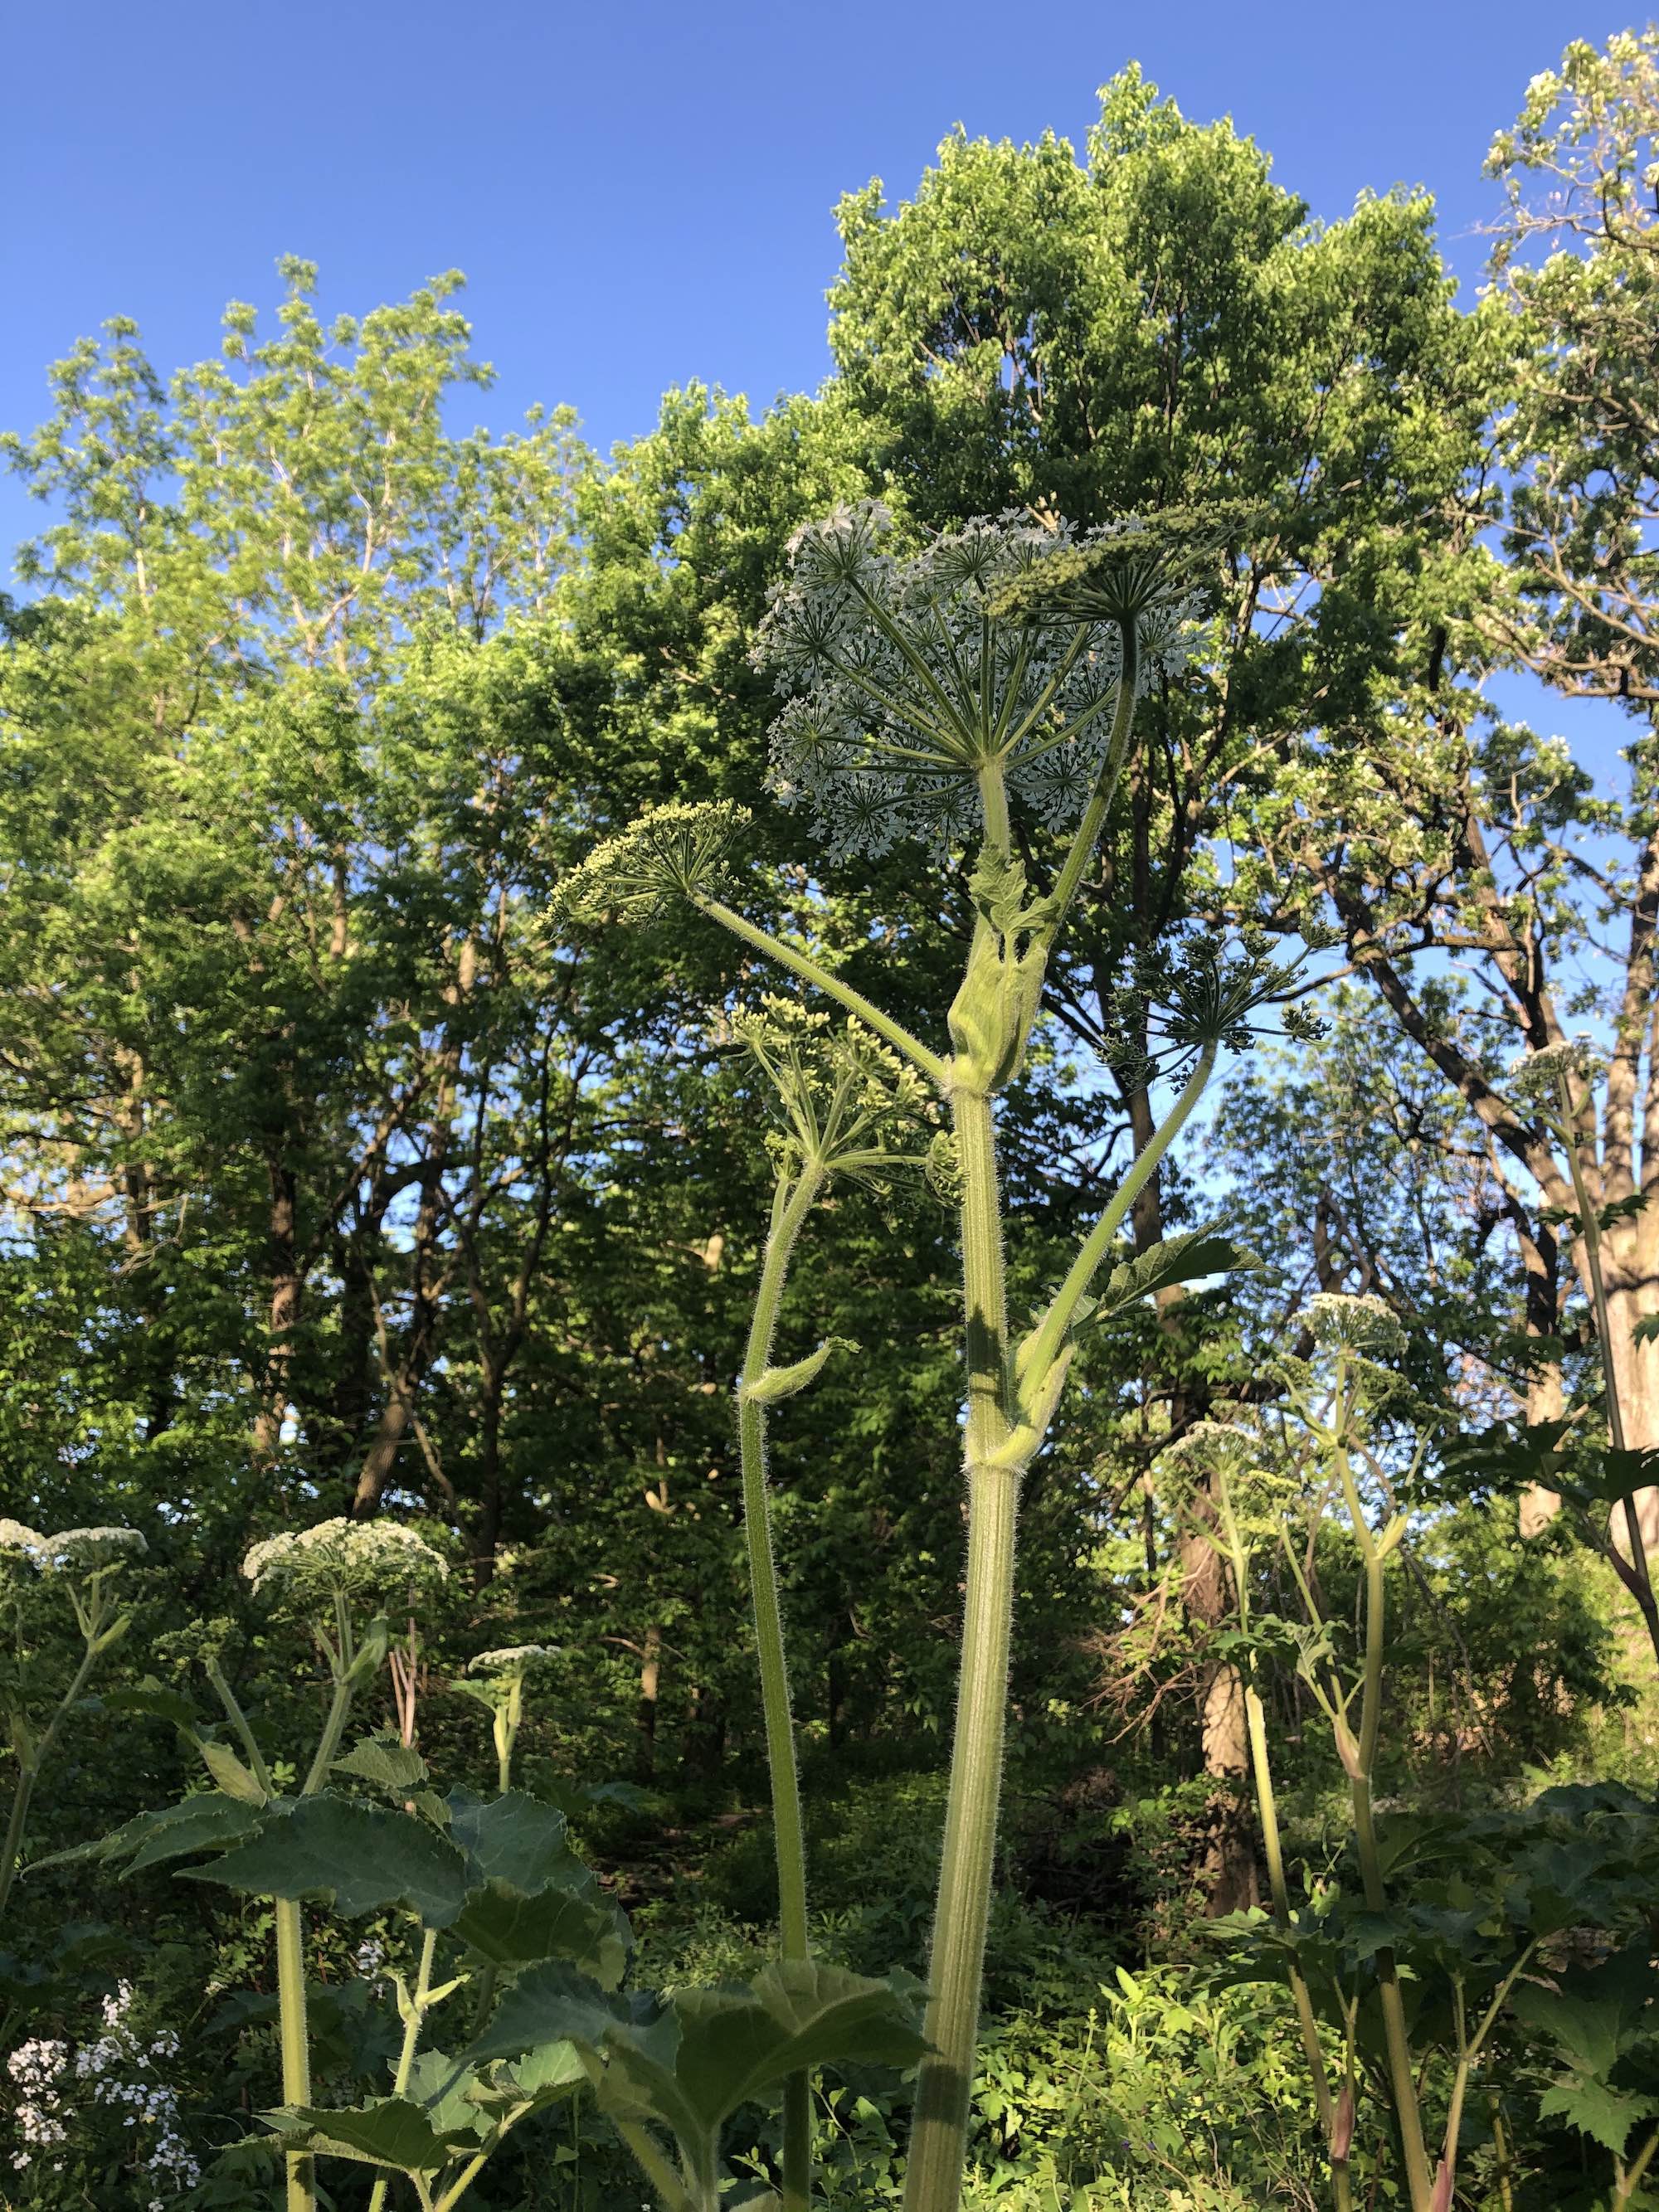 Cow Parsnip near Council Ring in Oak Savanna in Madison, Wisconsin on May 31, 2020.